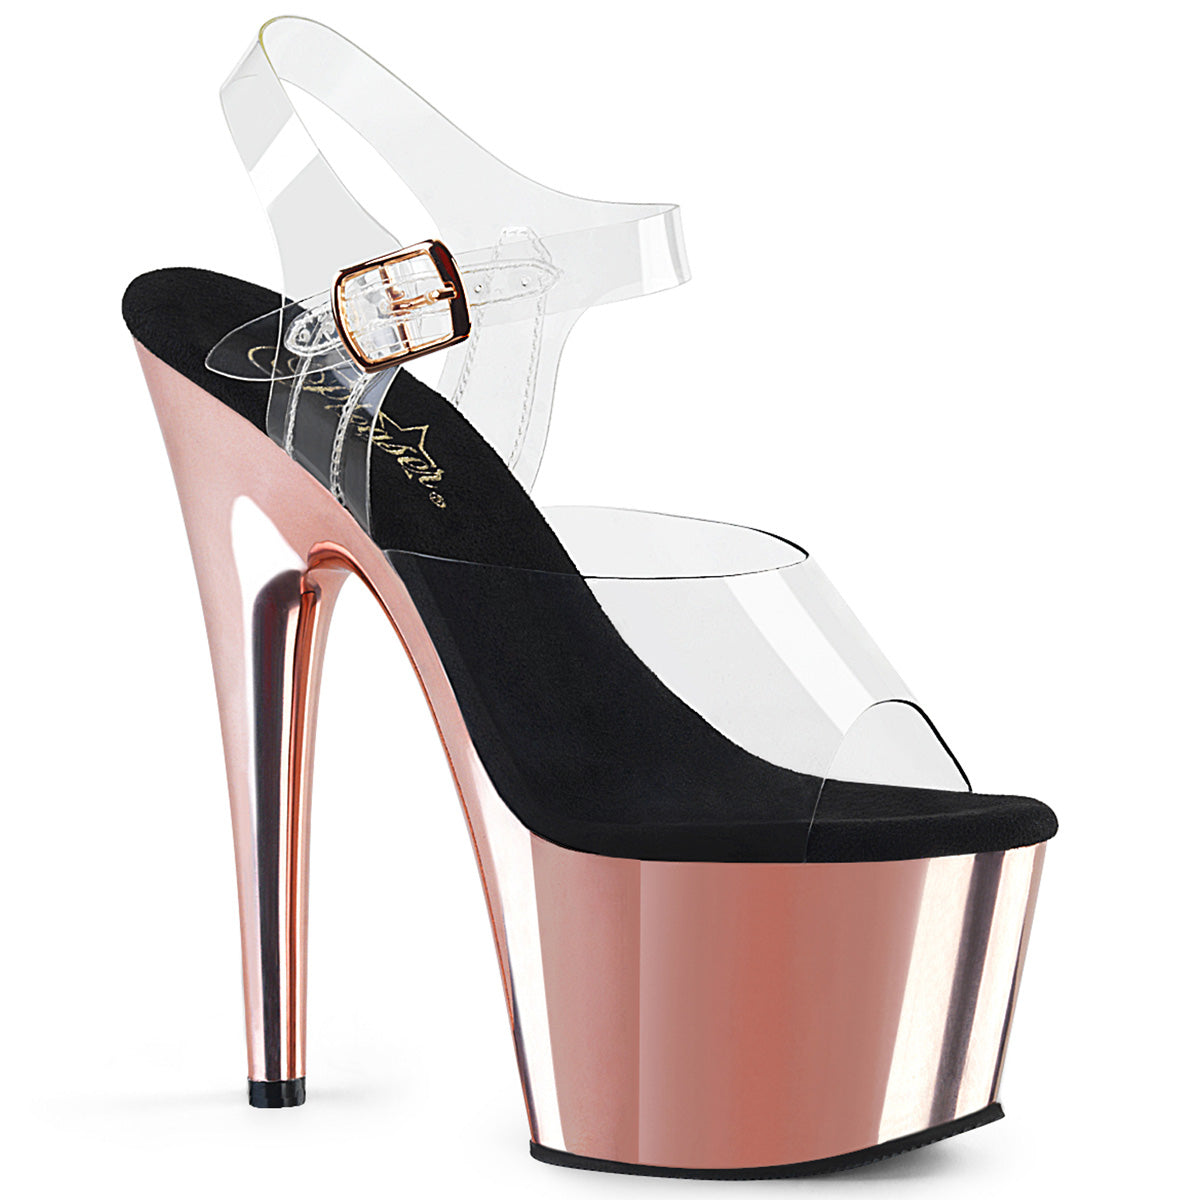 ADORE-708 7" High Pleaser Shoes